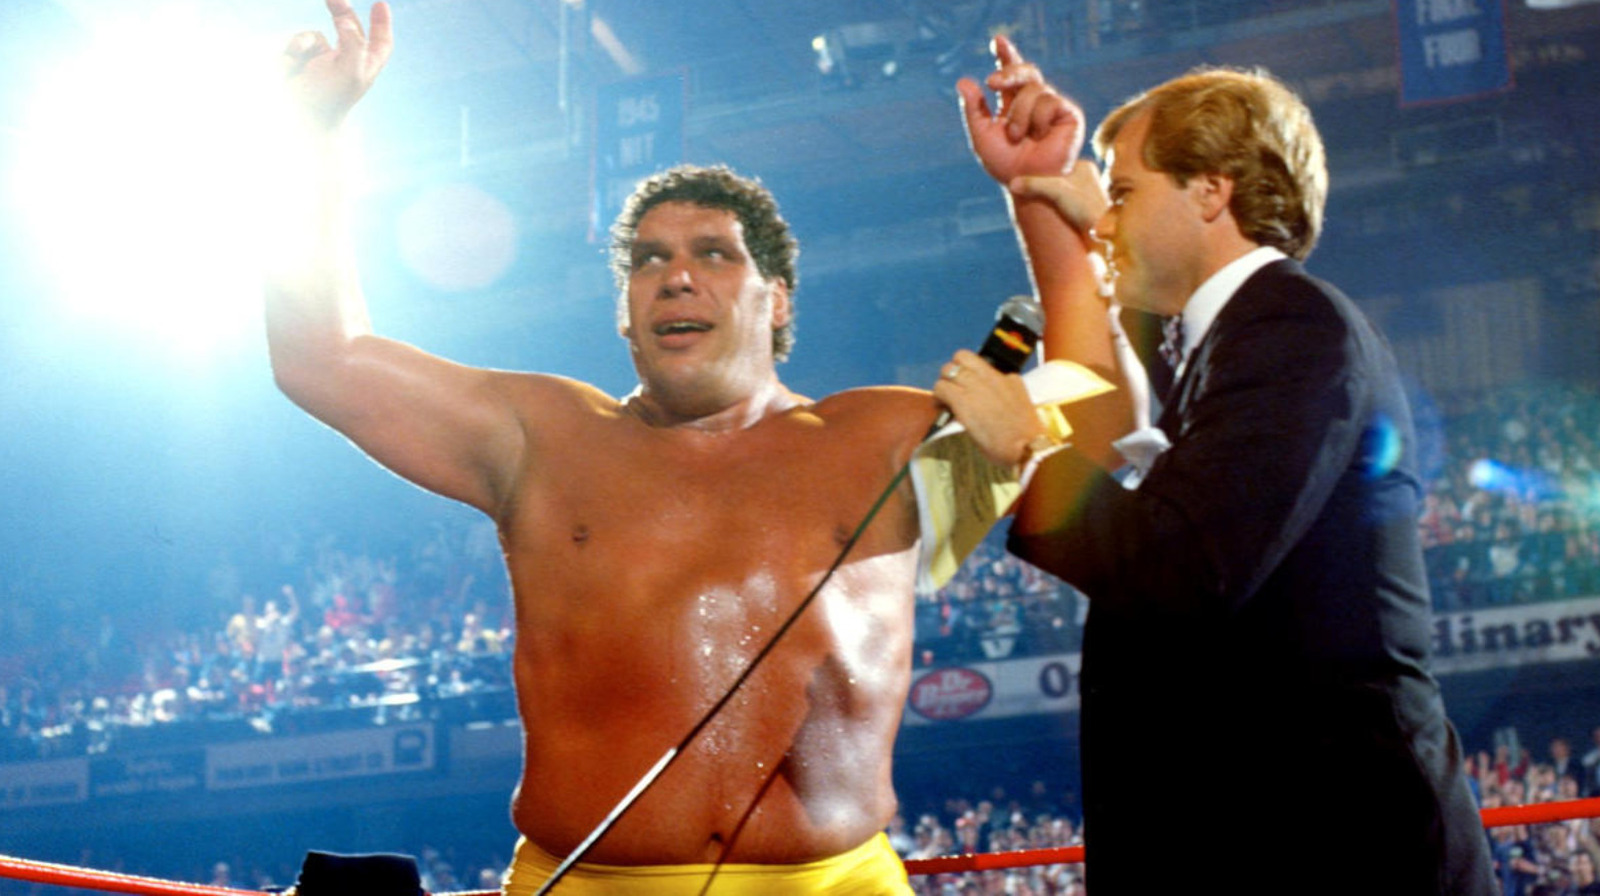 Demolition Smash Recalls Experiences Working With WWE Icon Andre The Giant